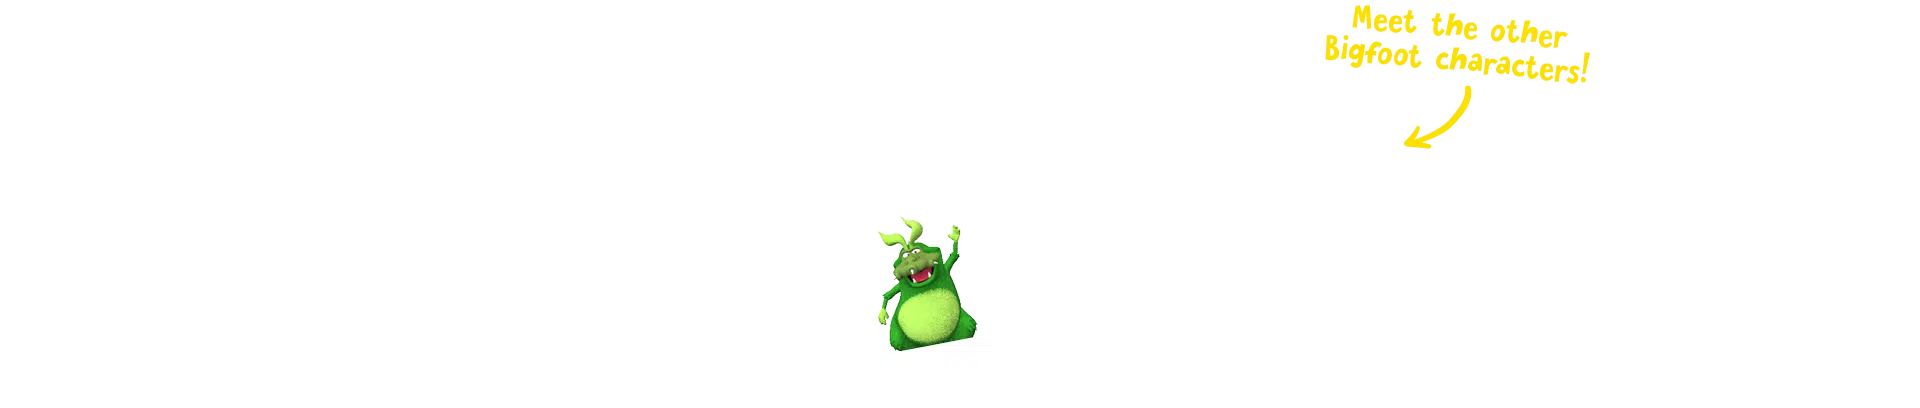 Crag Silhouette Curve Updated